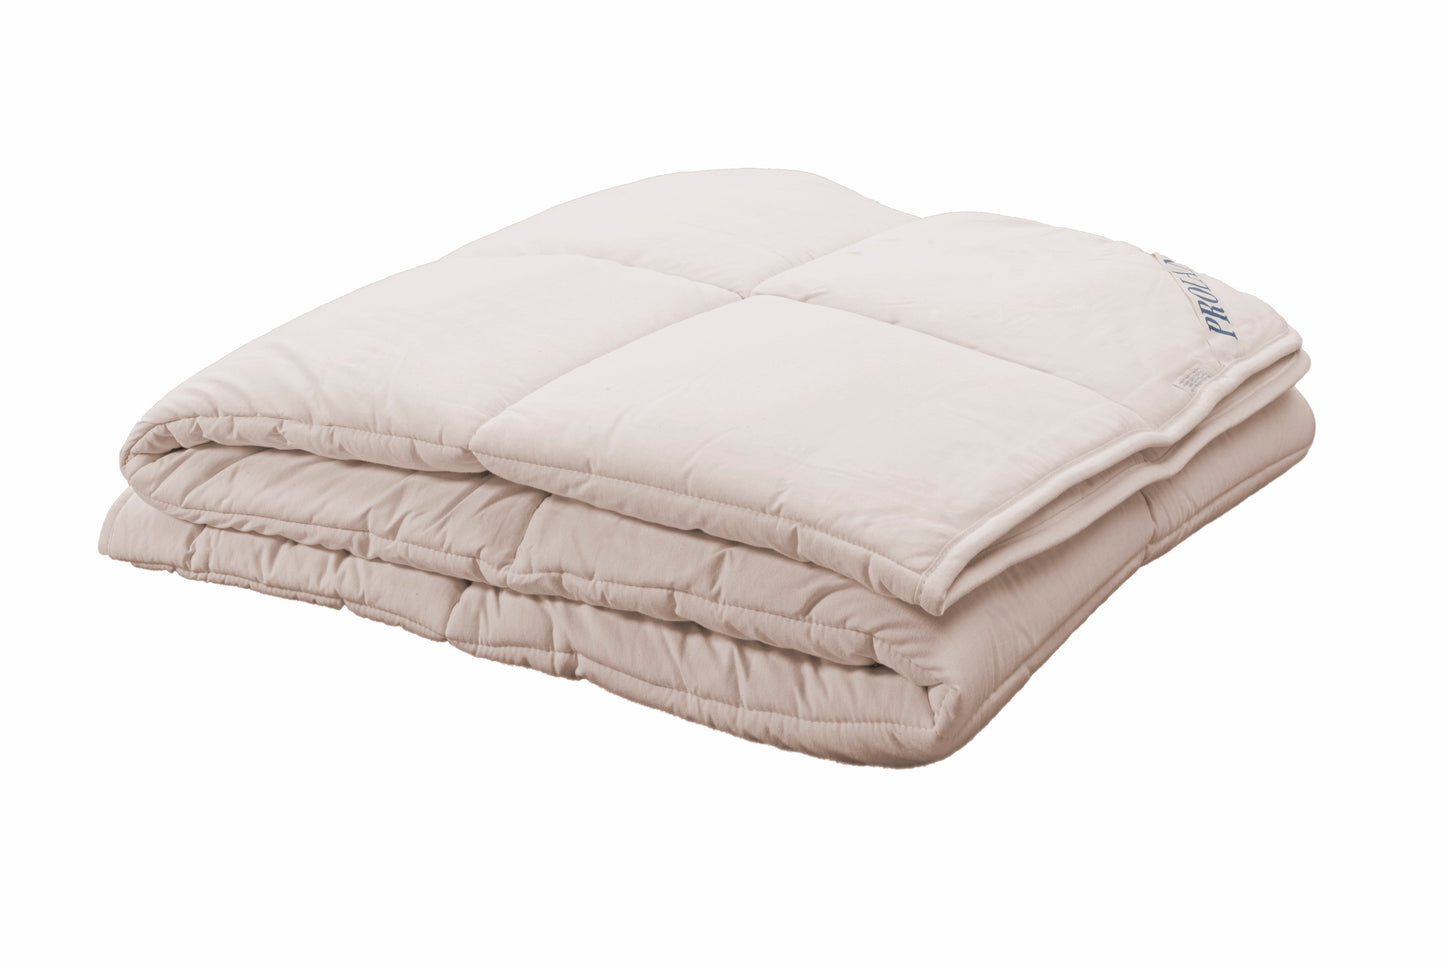 Couette duo pure laine vierge CESENA - hiver